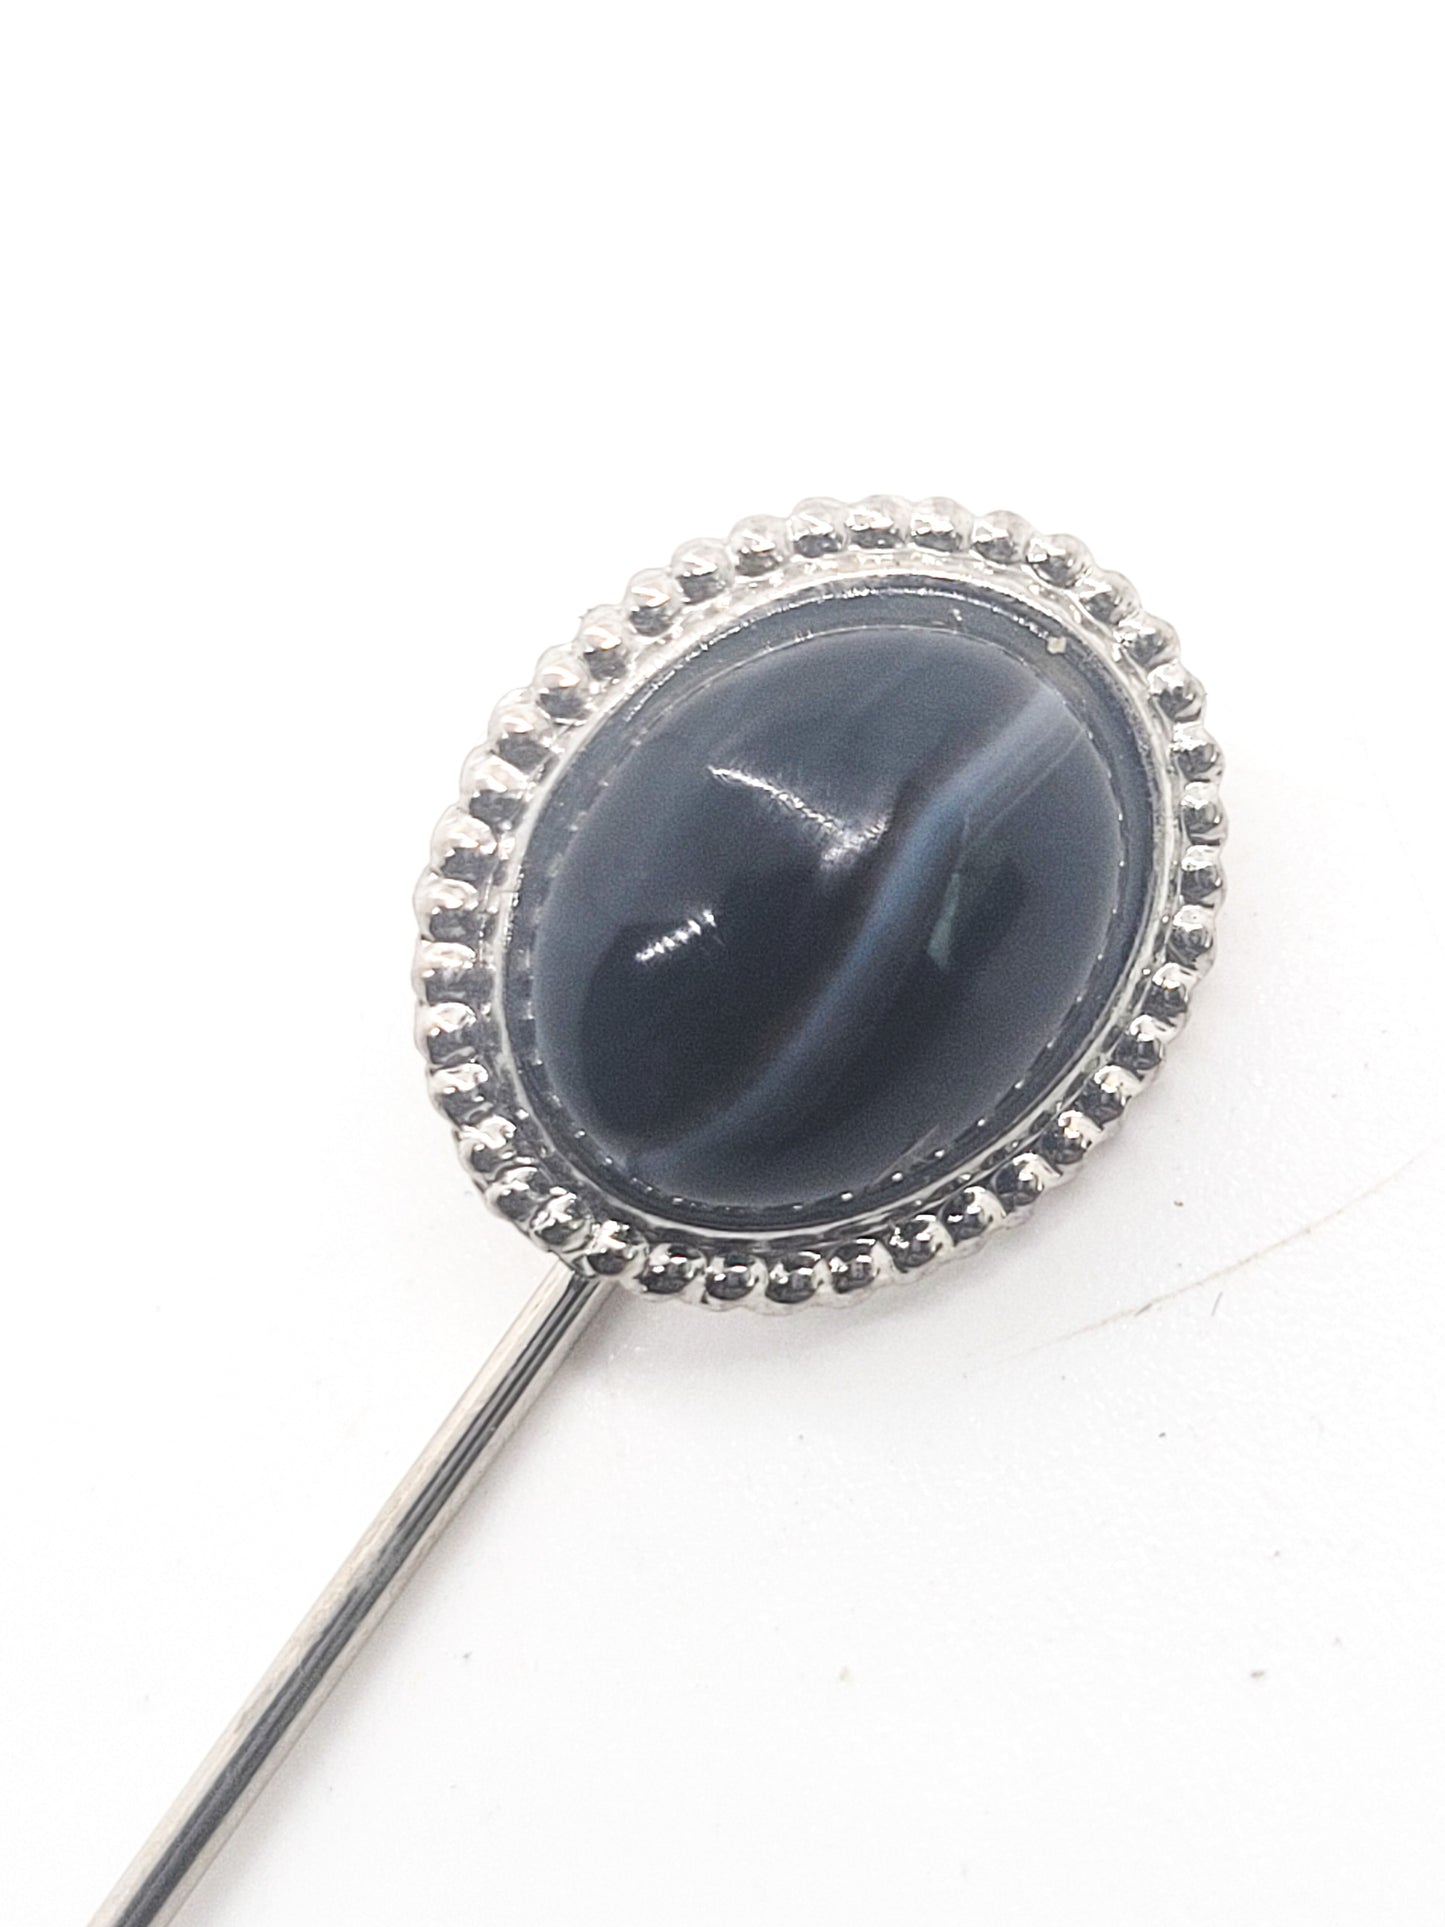 Black banded Agate vintage silver toned stick lapel pin